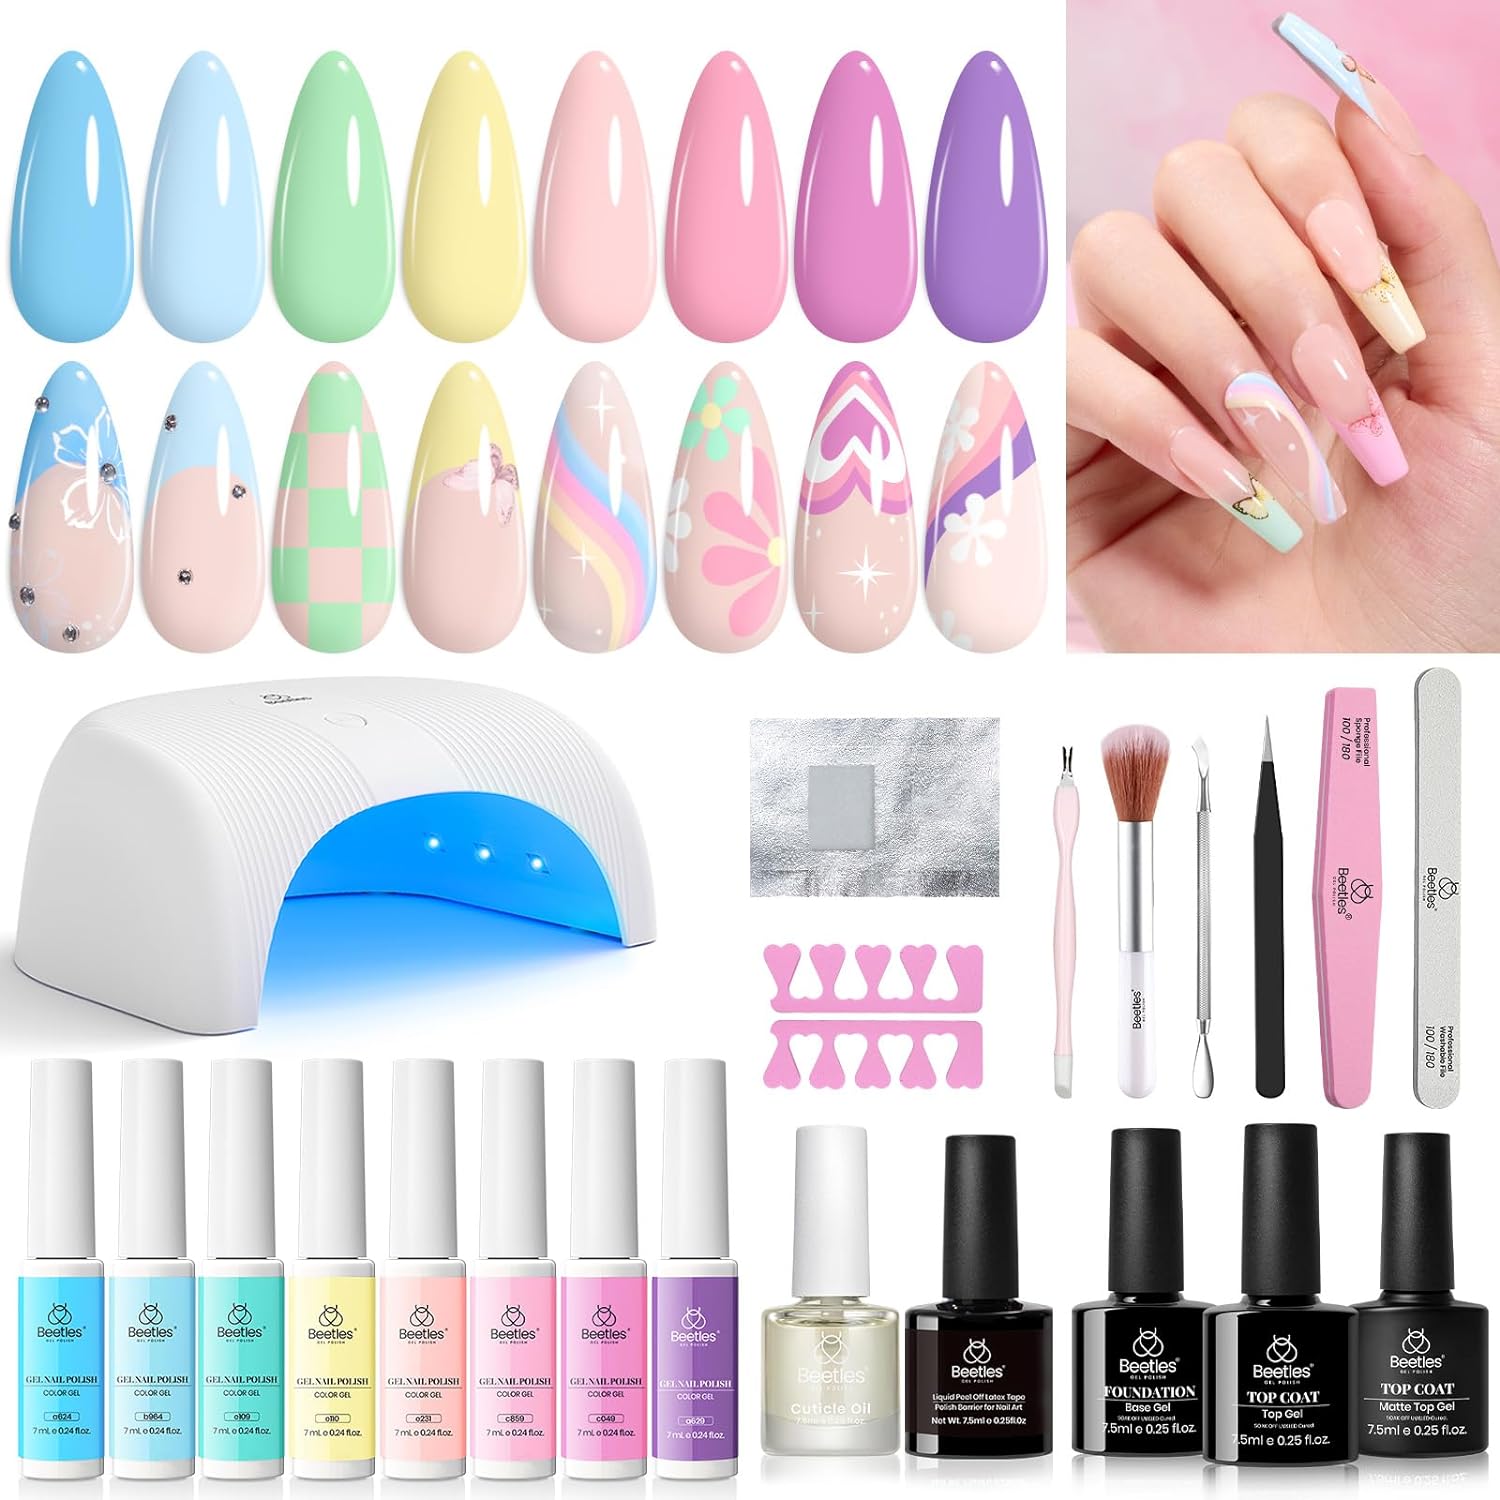 All-in-one Nails Starter Kit #224